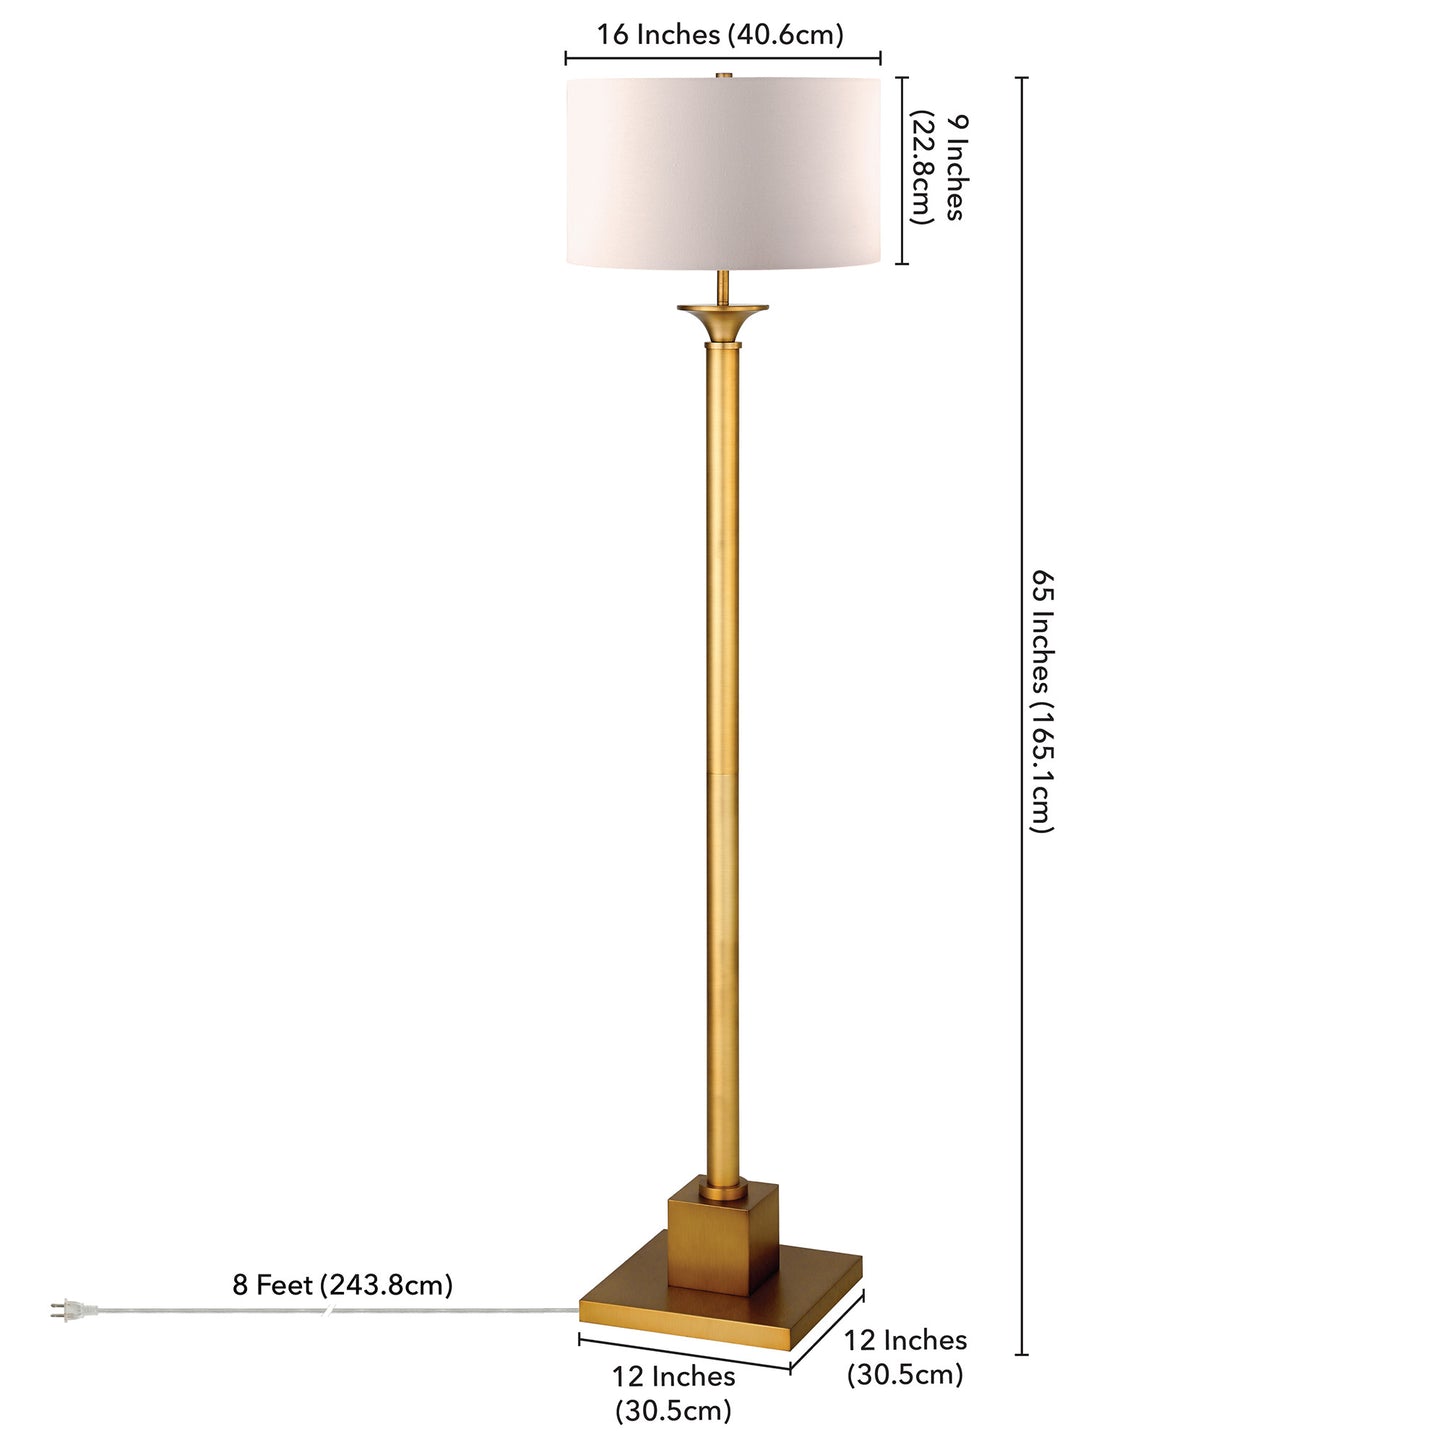 65" Brass Traditional Shaped Floor Lamp With White Frosted Glass Drum Shade